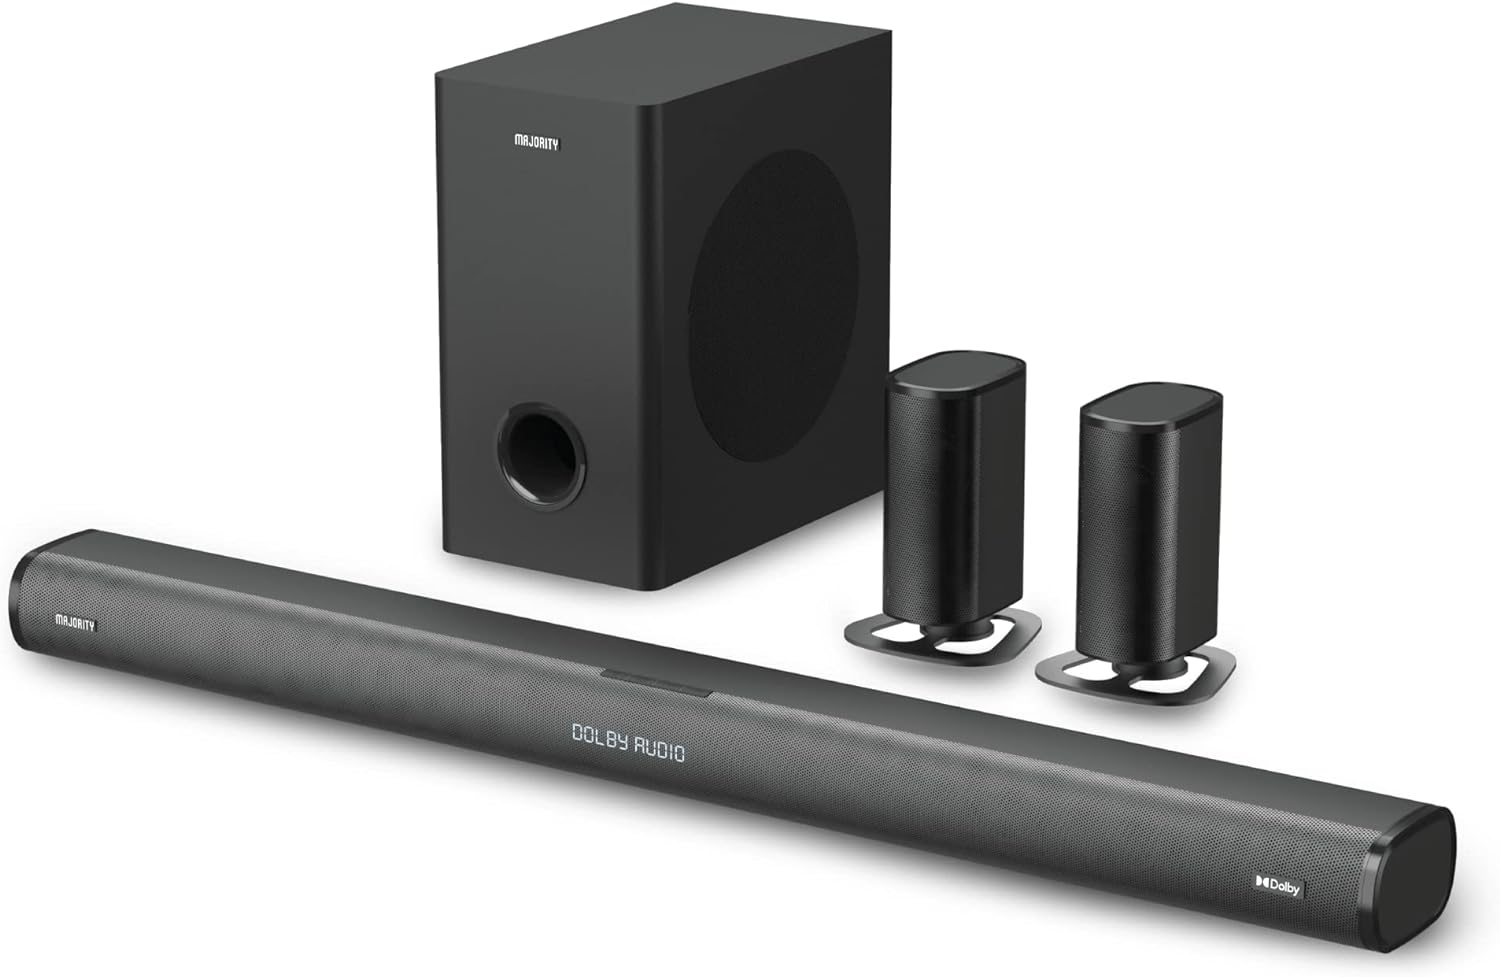 Majority Everest 5.1 Dolby Audio Surround Sound System with Sound Bar | Wireless Subwoofer I 300W Powerful Surround Sound | Home Theatre 3D Audio with Detachable Speakers | HDMI ARC, HDMI, Bluetooth